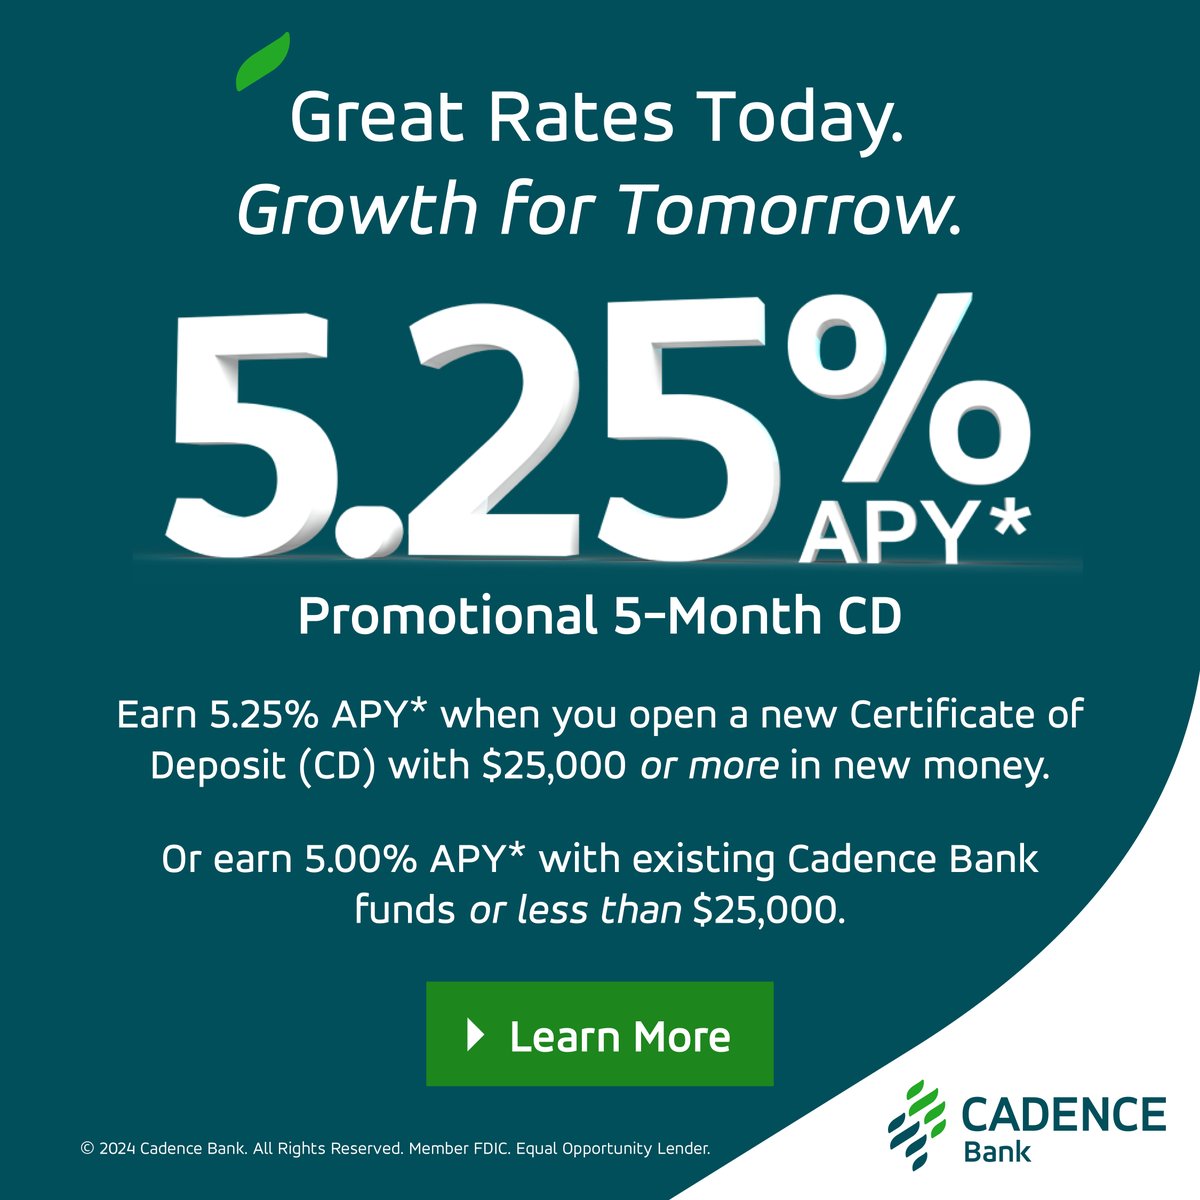 Want a steady and secure way to grow your money? Earn 5.25% Annual Percentage Yield* when you open a new CD with $25,000 or more in non-Cadence funds. cadencebank.com/cds